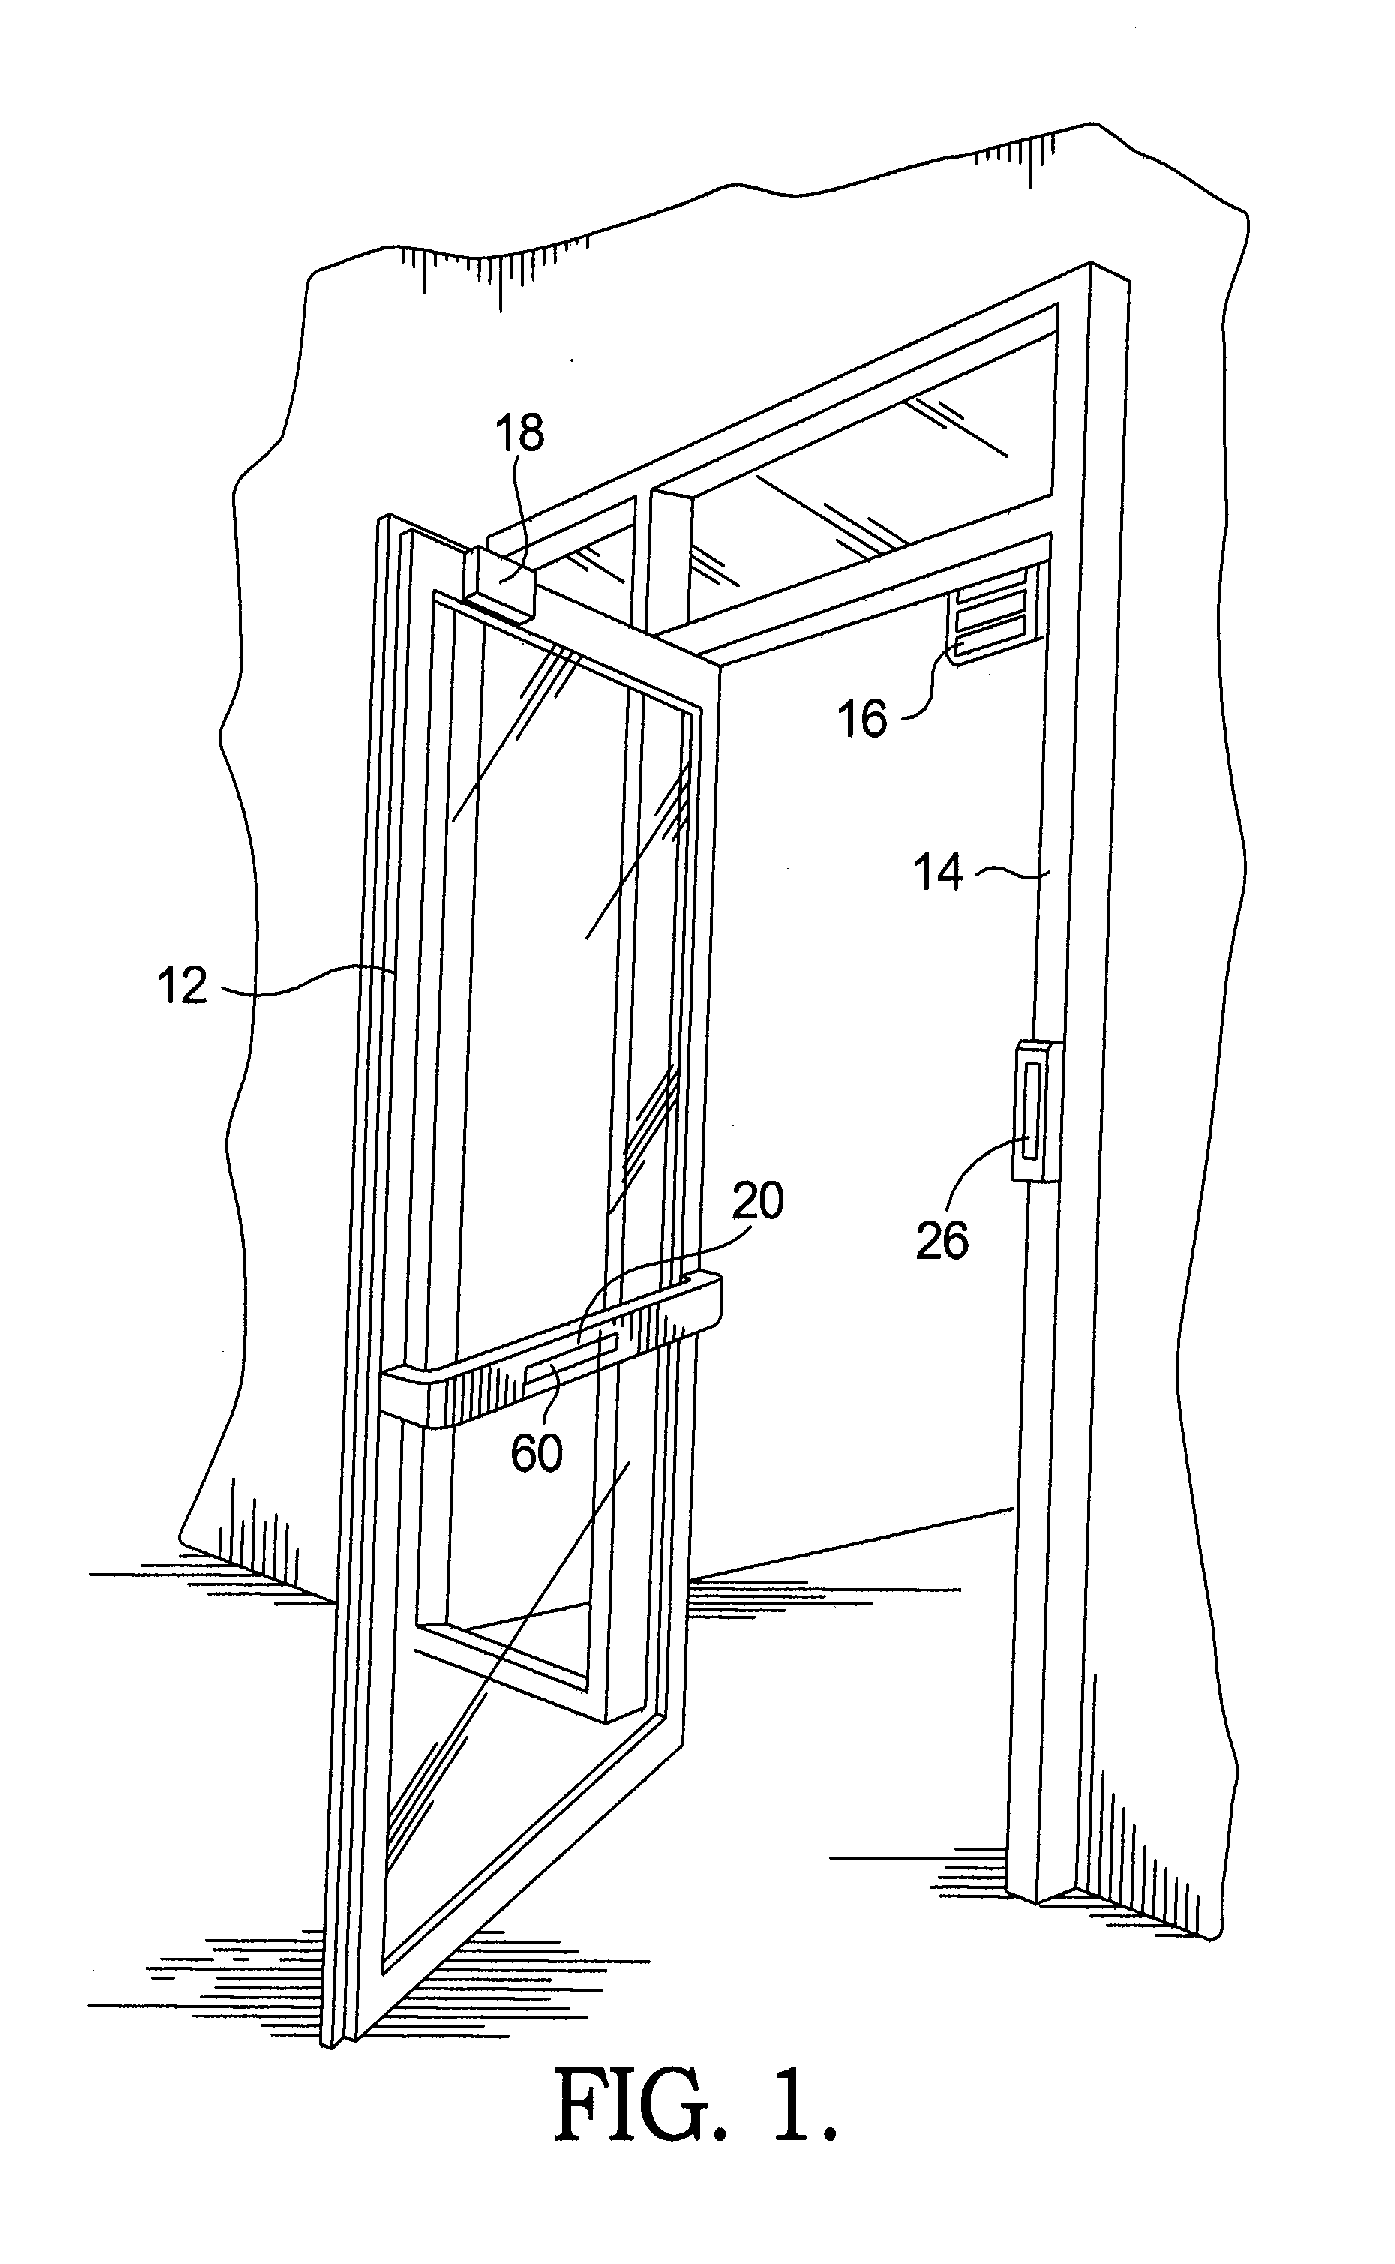 Access Control Device for a Door